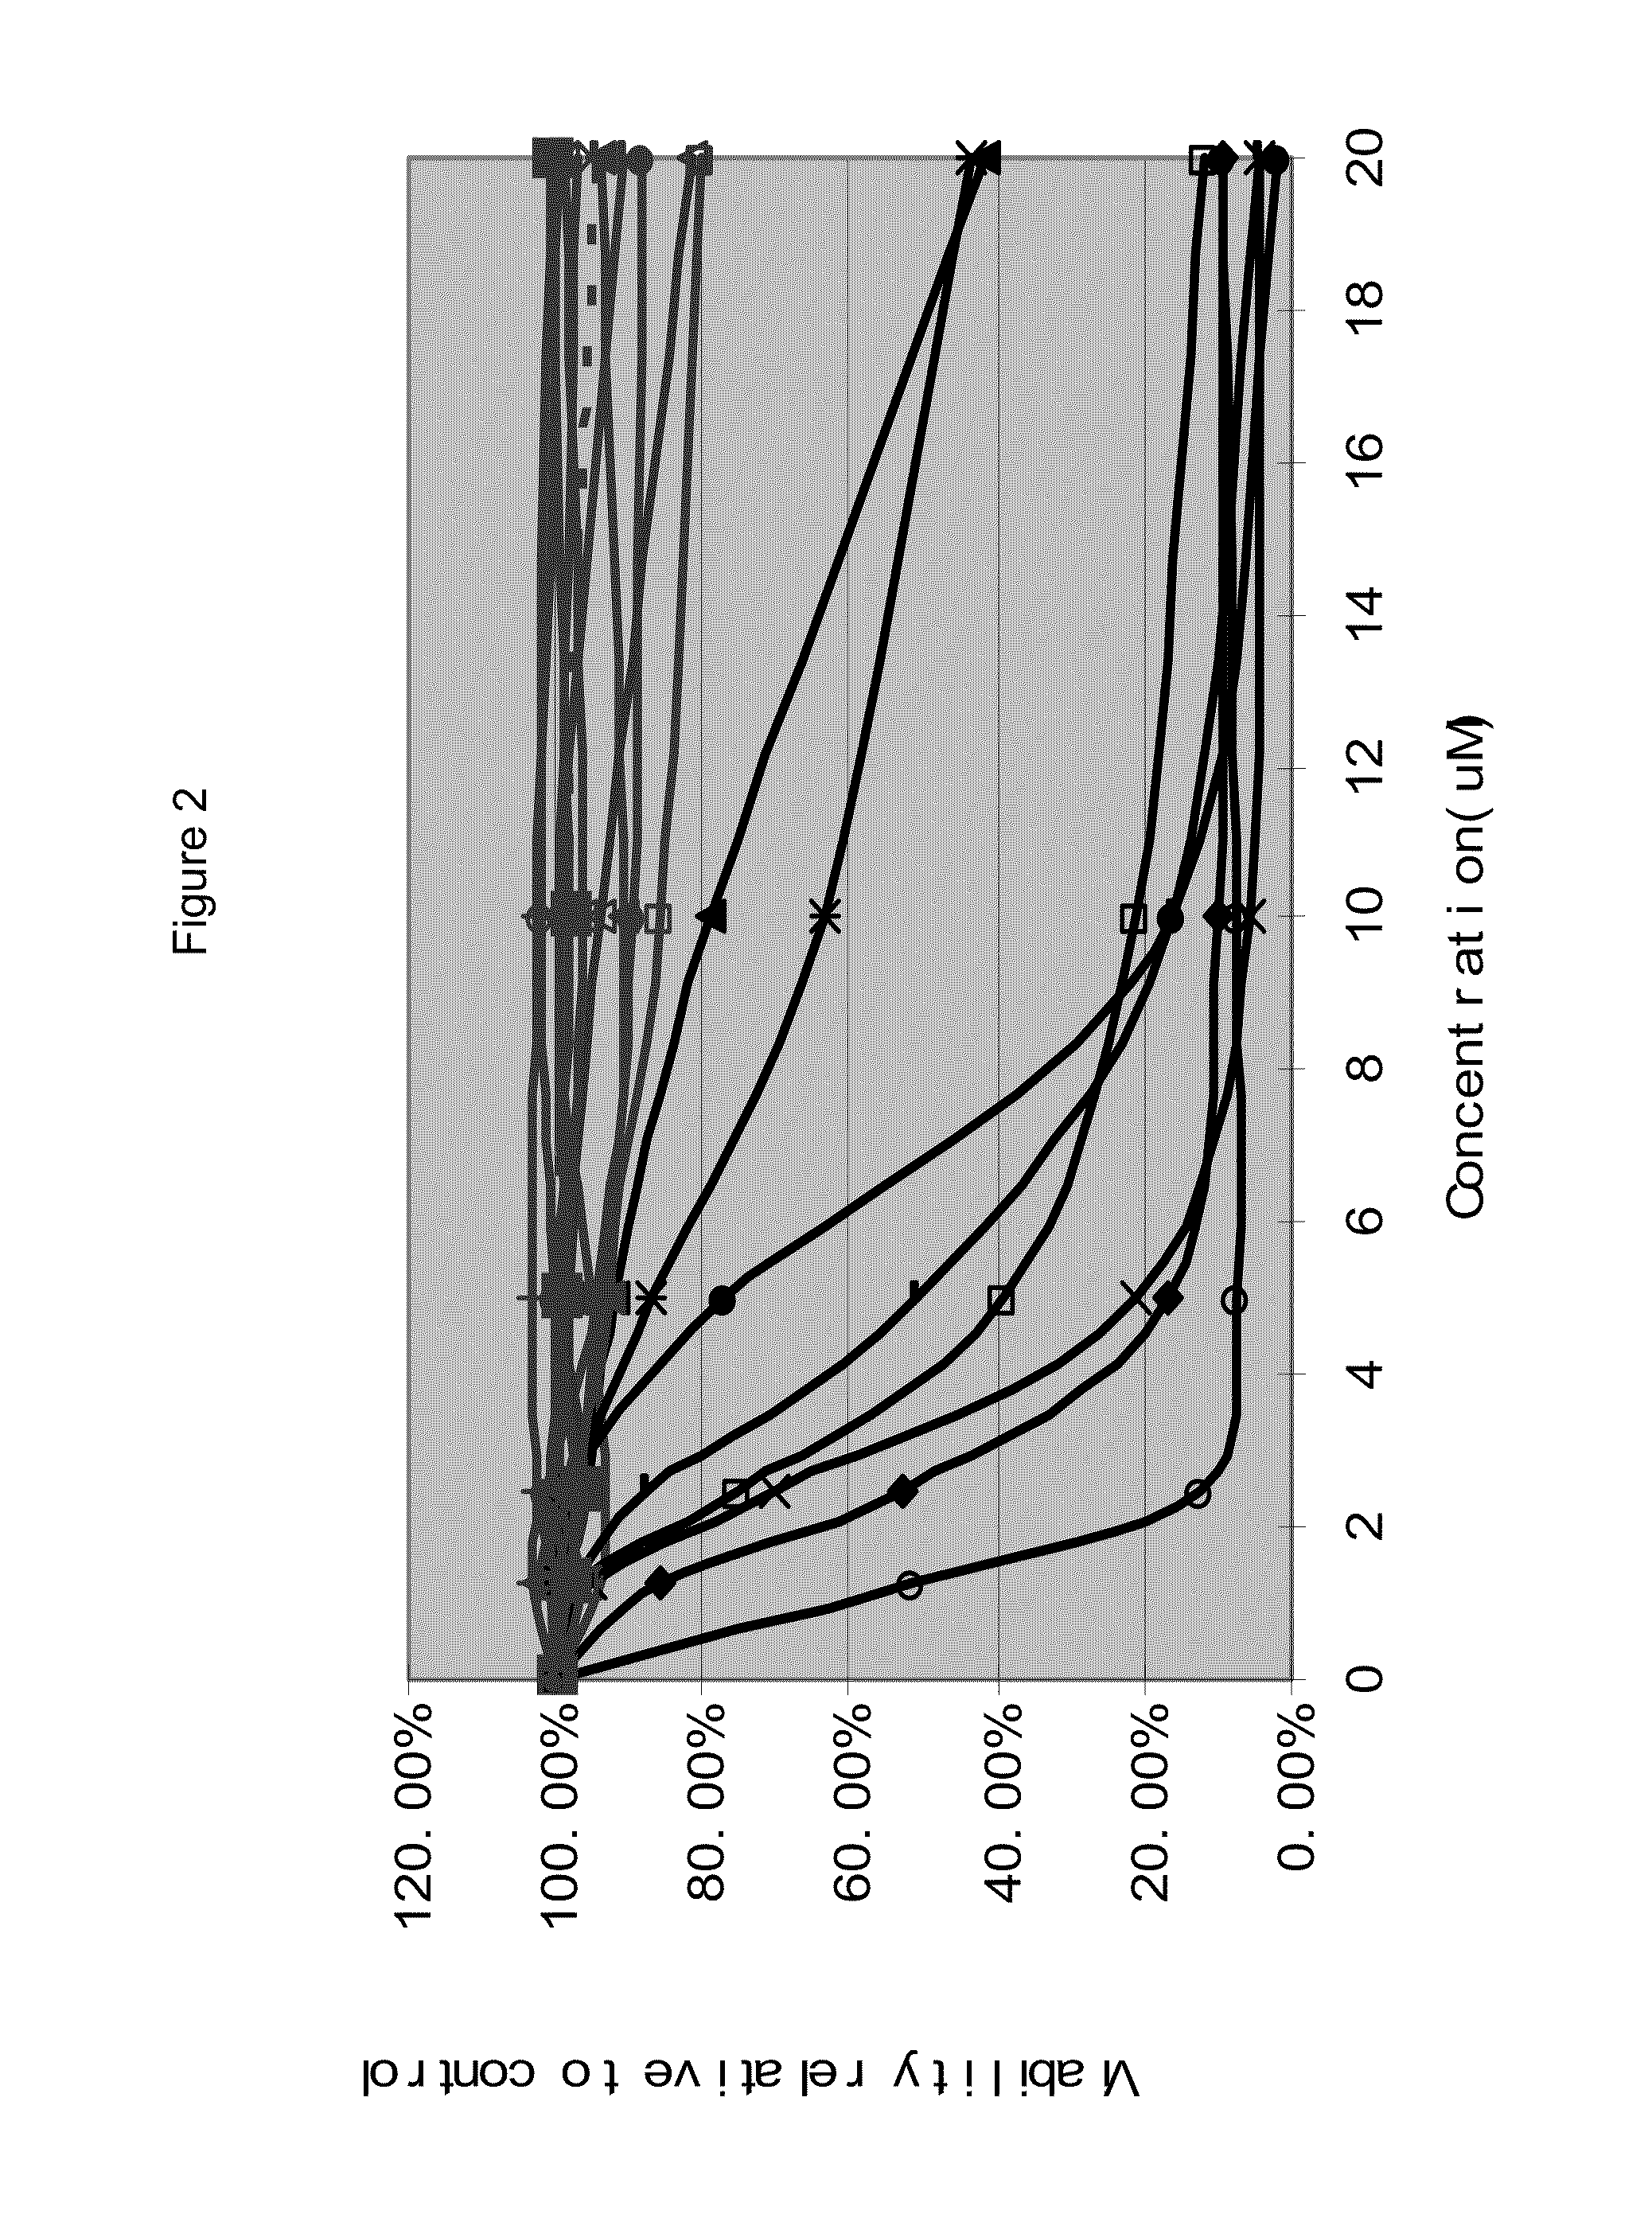 Biomarkers for mdm2 inhibitors for use in treating disease